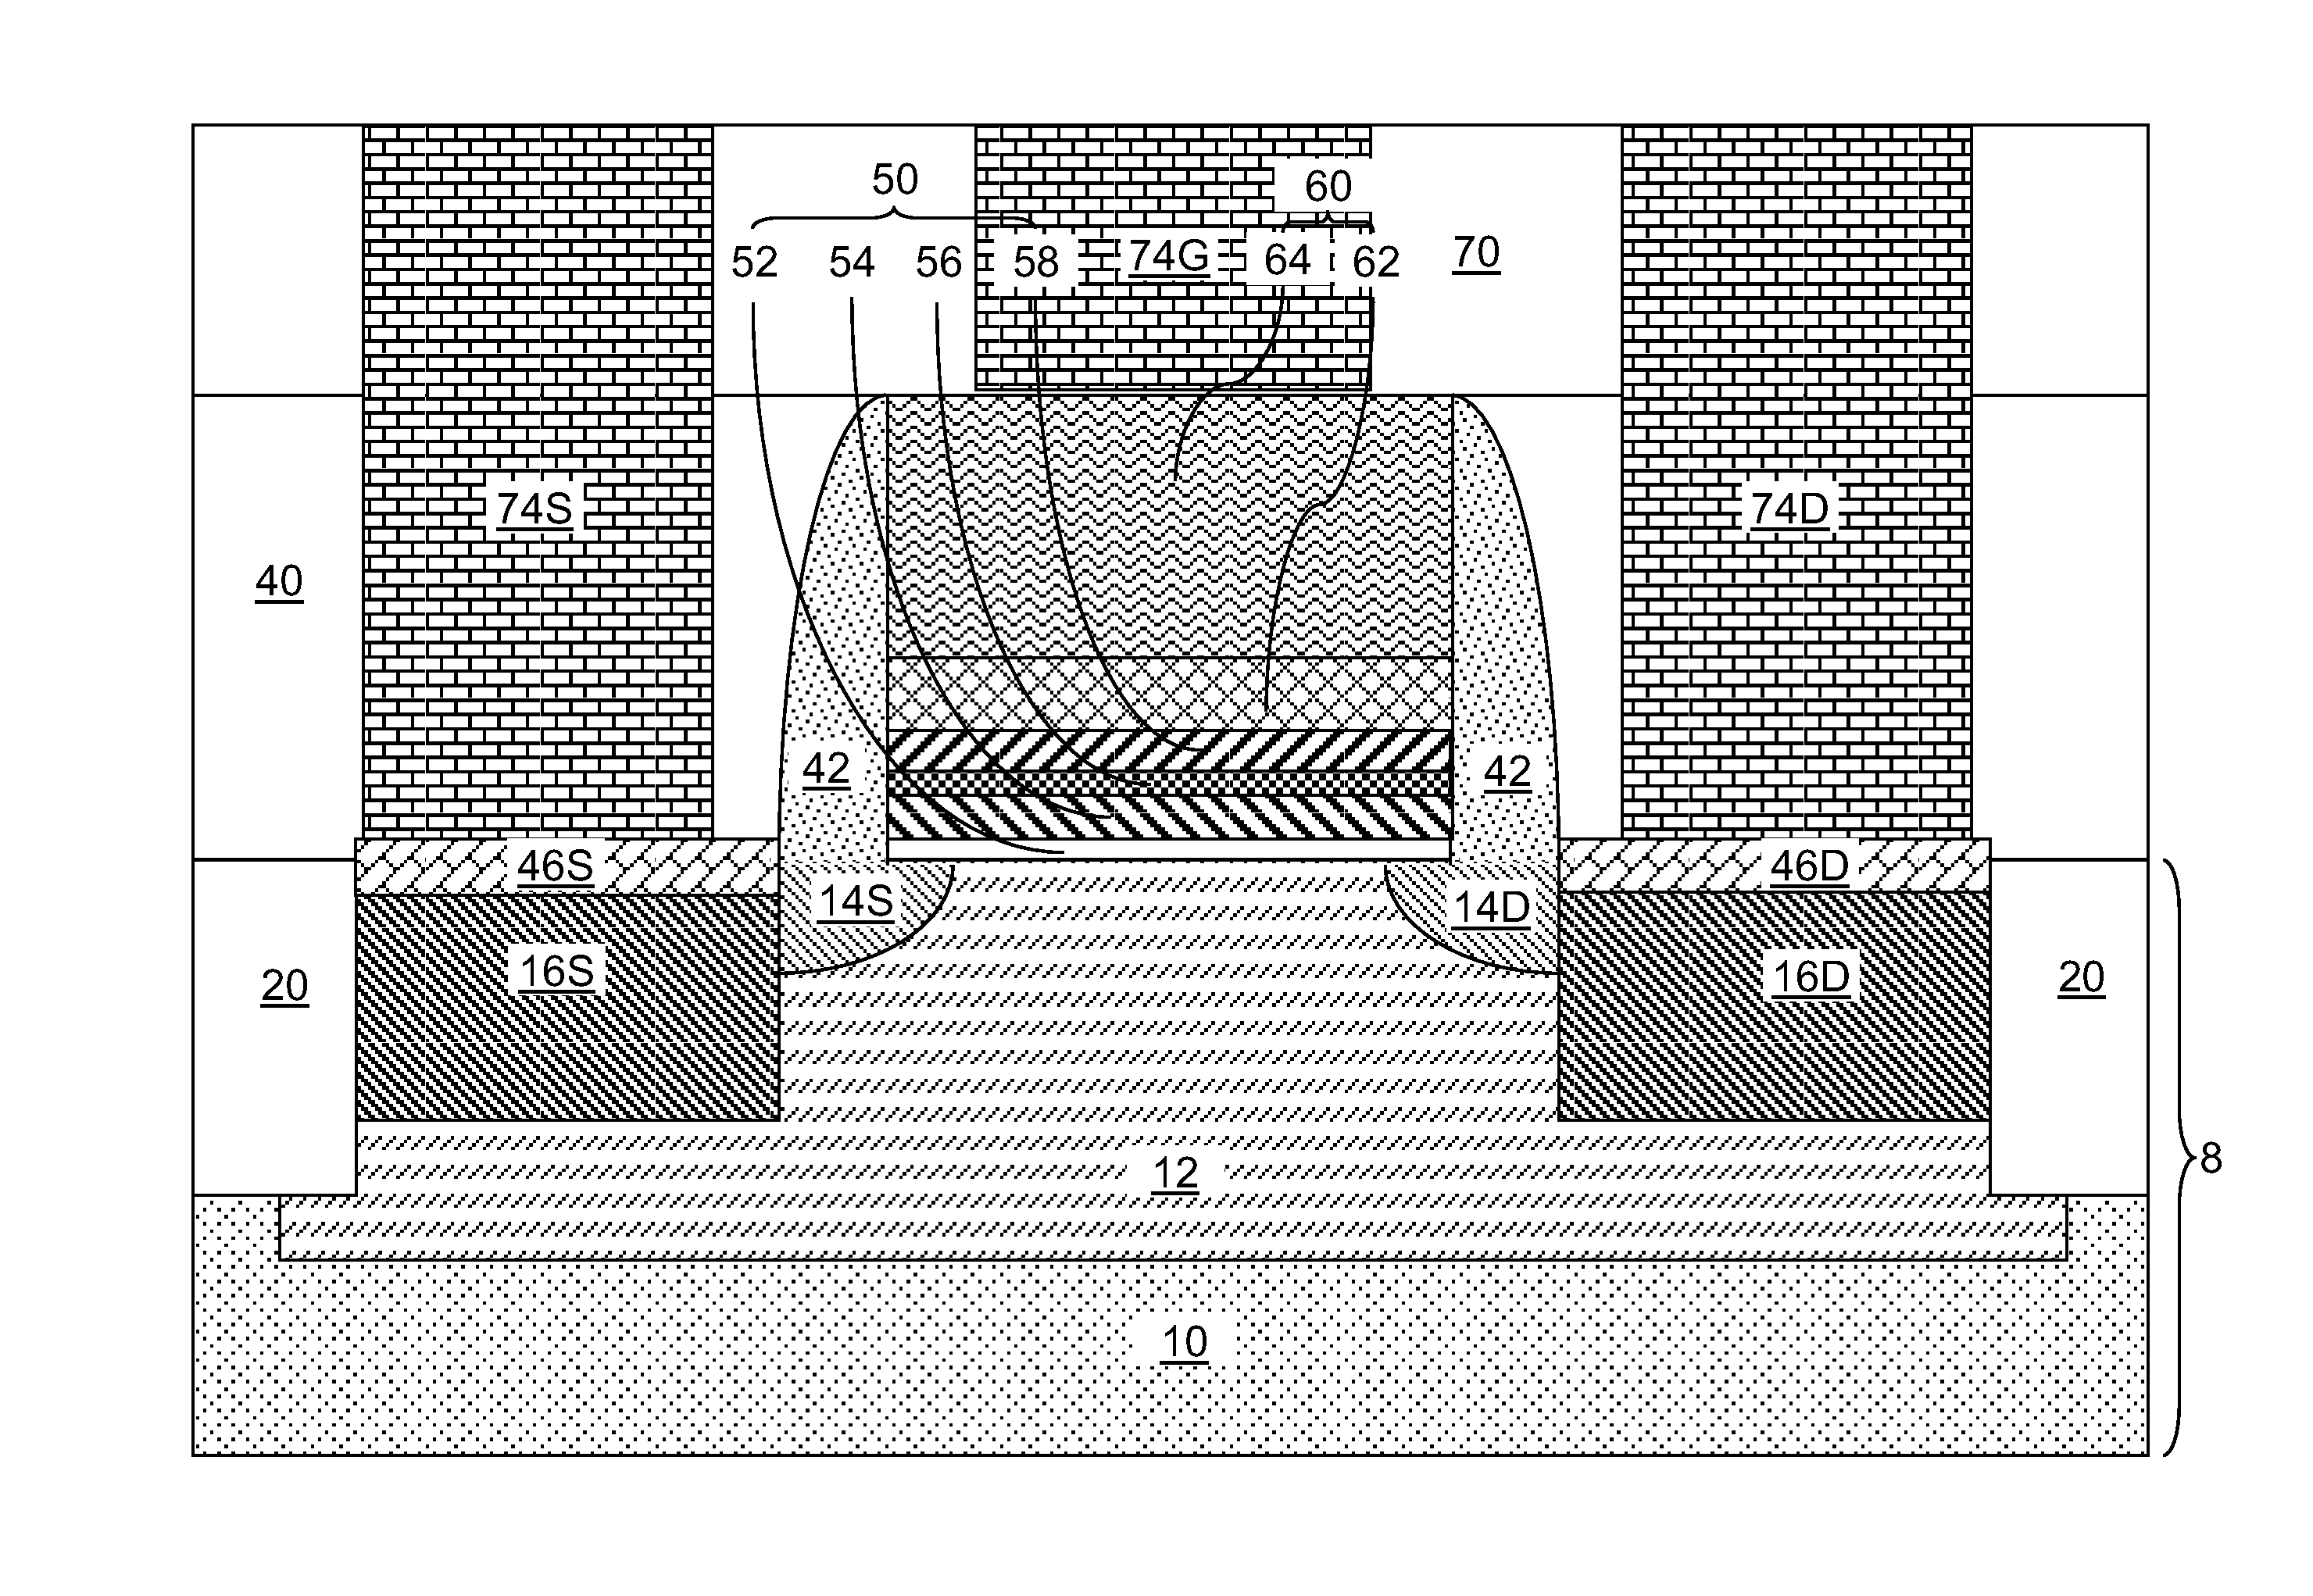 Stratified gate dielectric stack for gate dielectric leakage reduction